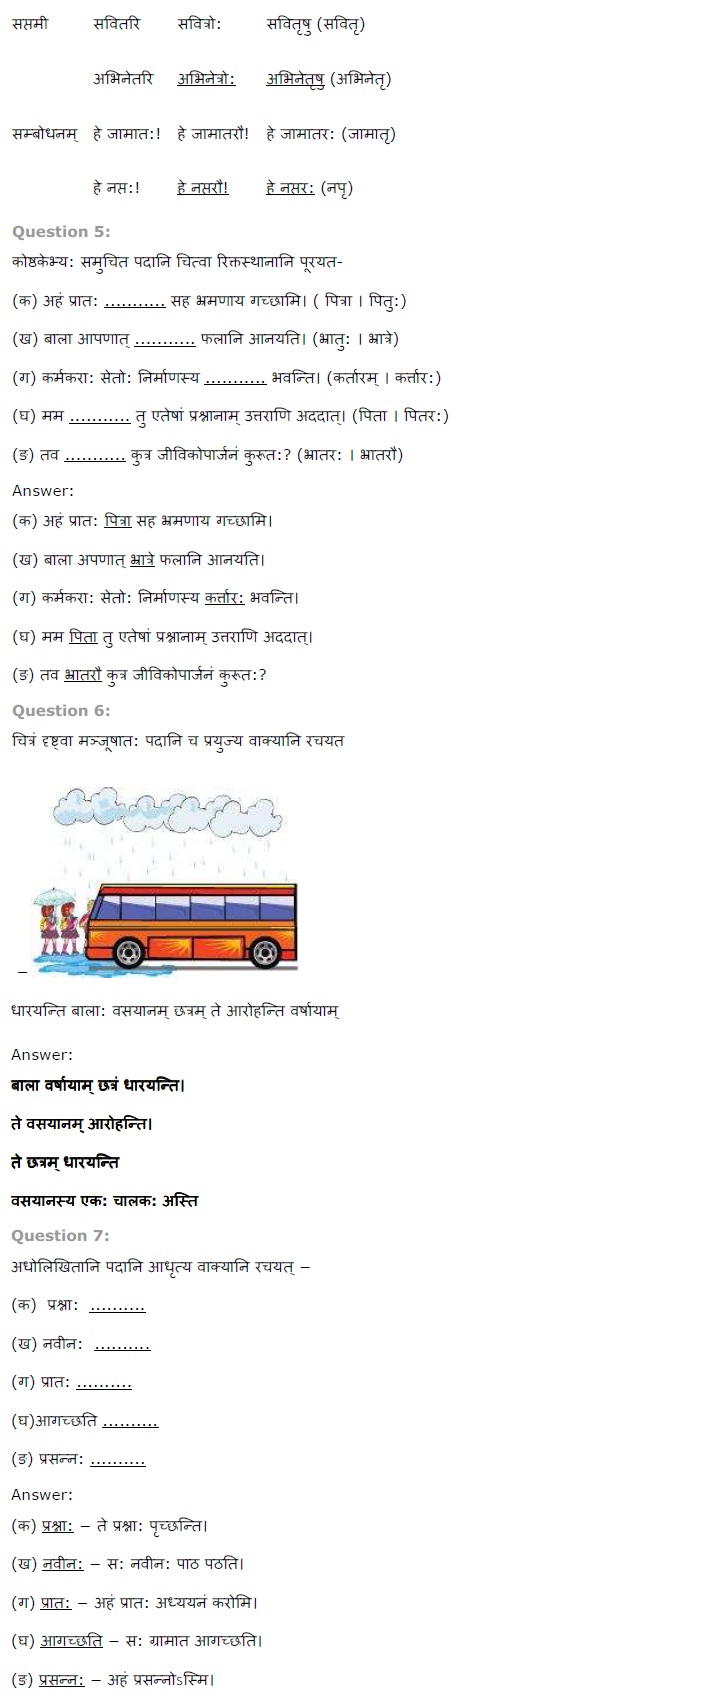 NCERT Solutions for Class 7th Sanskrit Chapter 14 - अनारिकाया जिज्ञासा